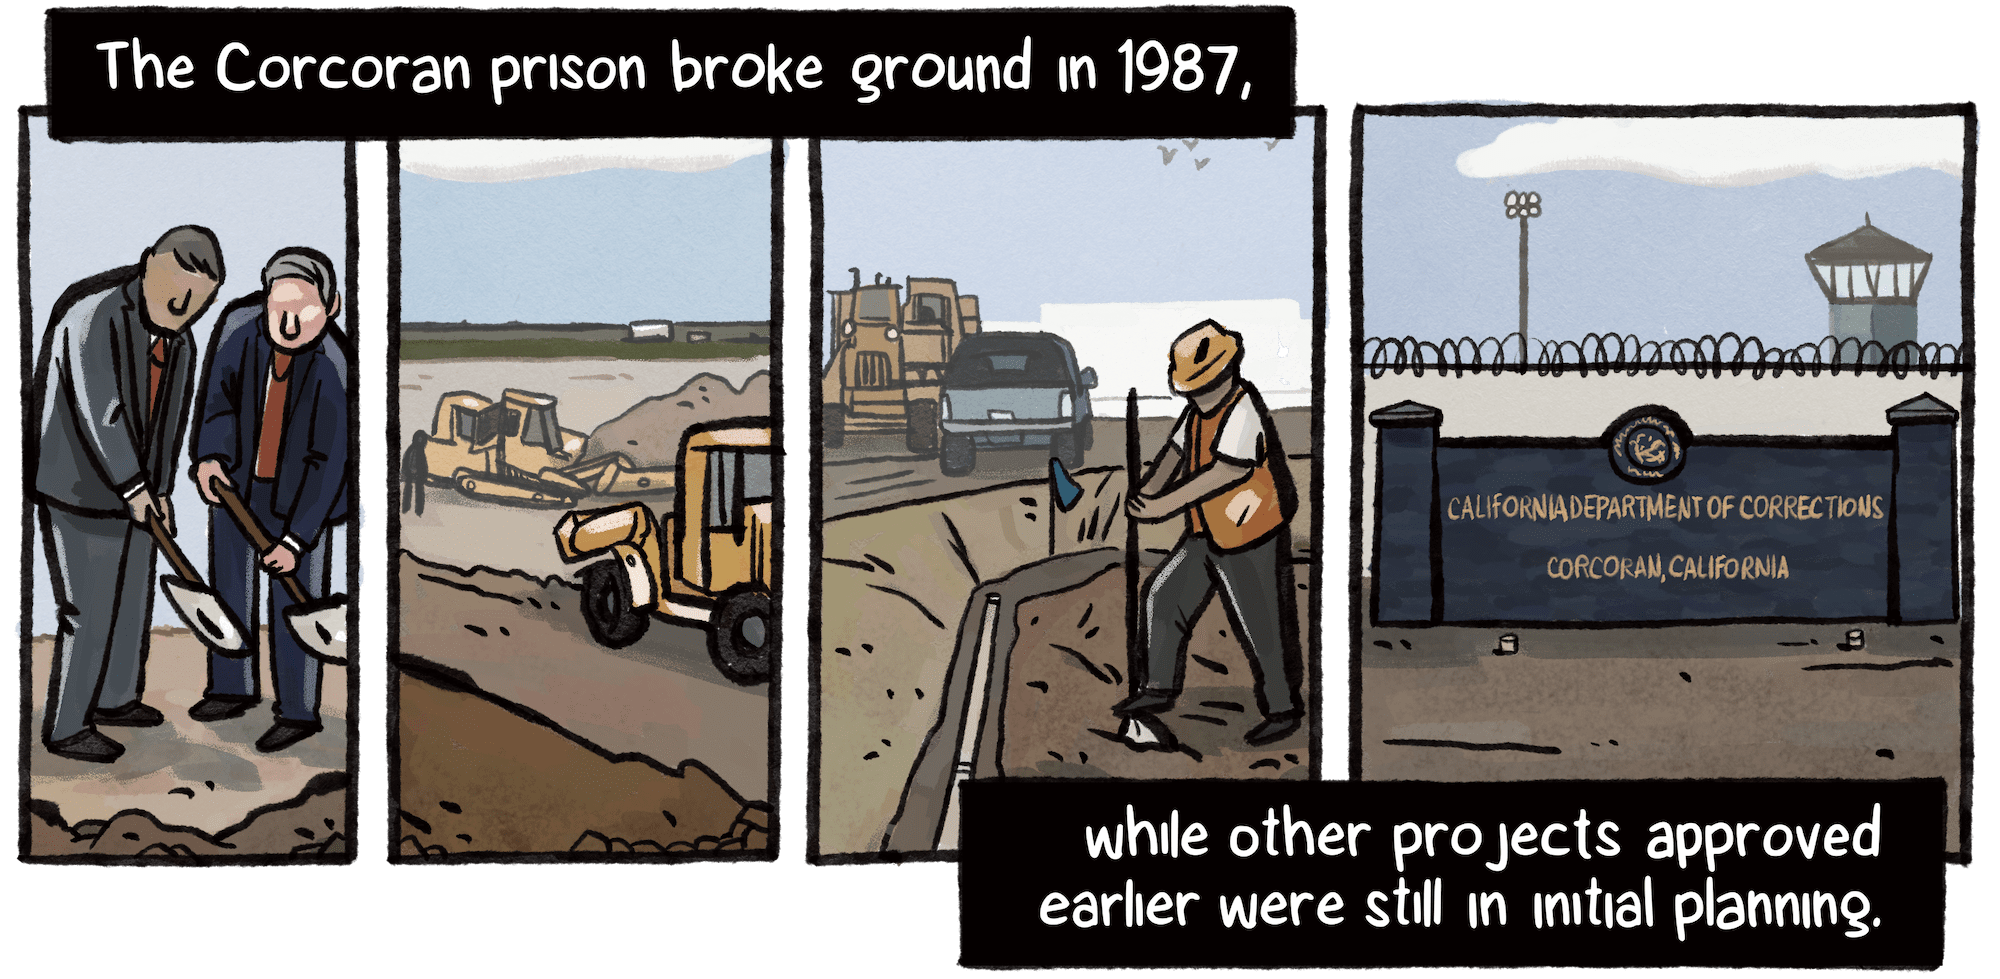 he Corcoran prison broke ground in 1987, while other projects approved earlier were still in initial planning. A series of images depict scenes of a groundbreaking ceremony, construction and a finished prison.